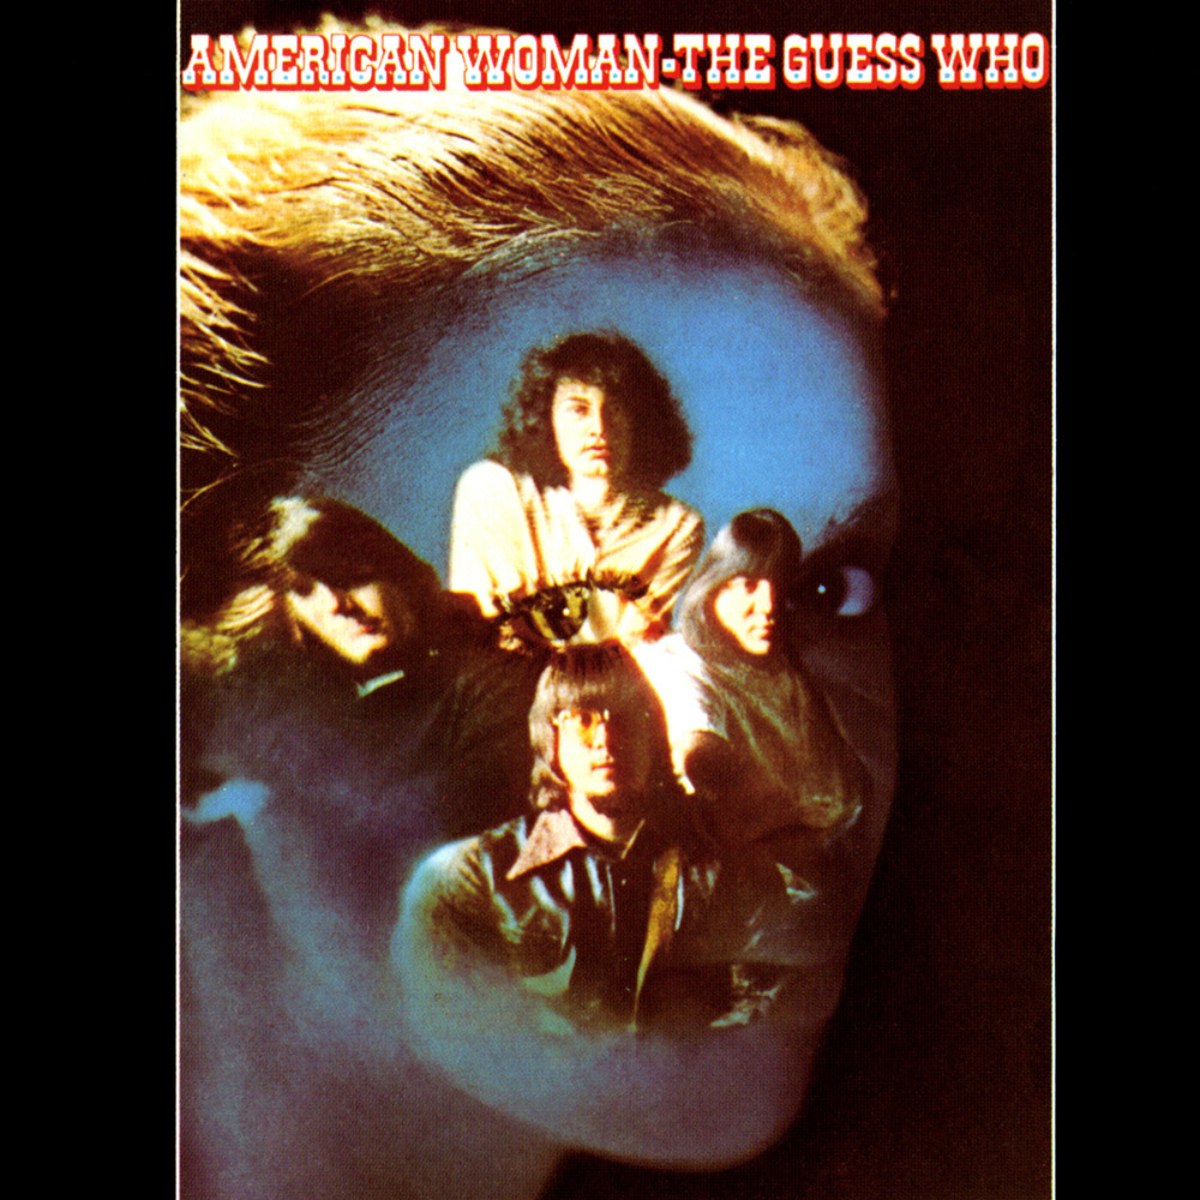 The Guess Who, обложка альбома American Woman